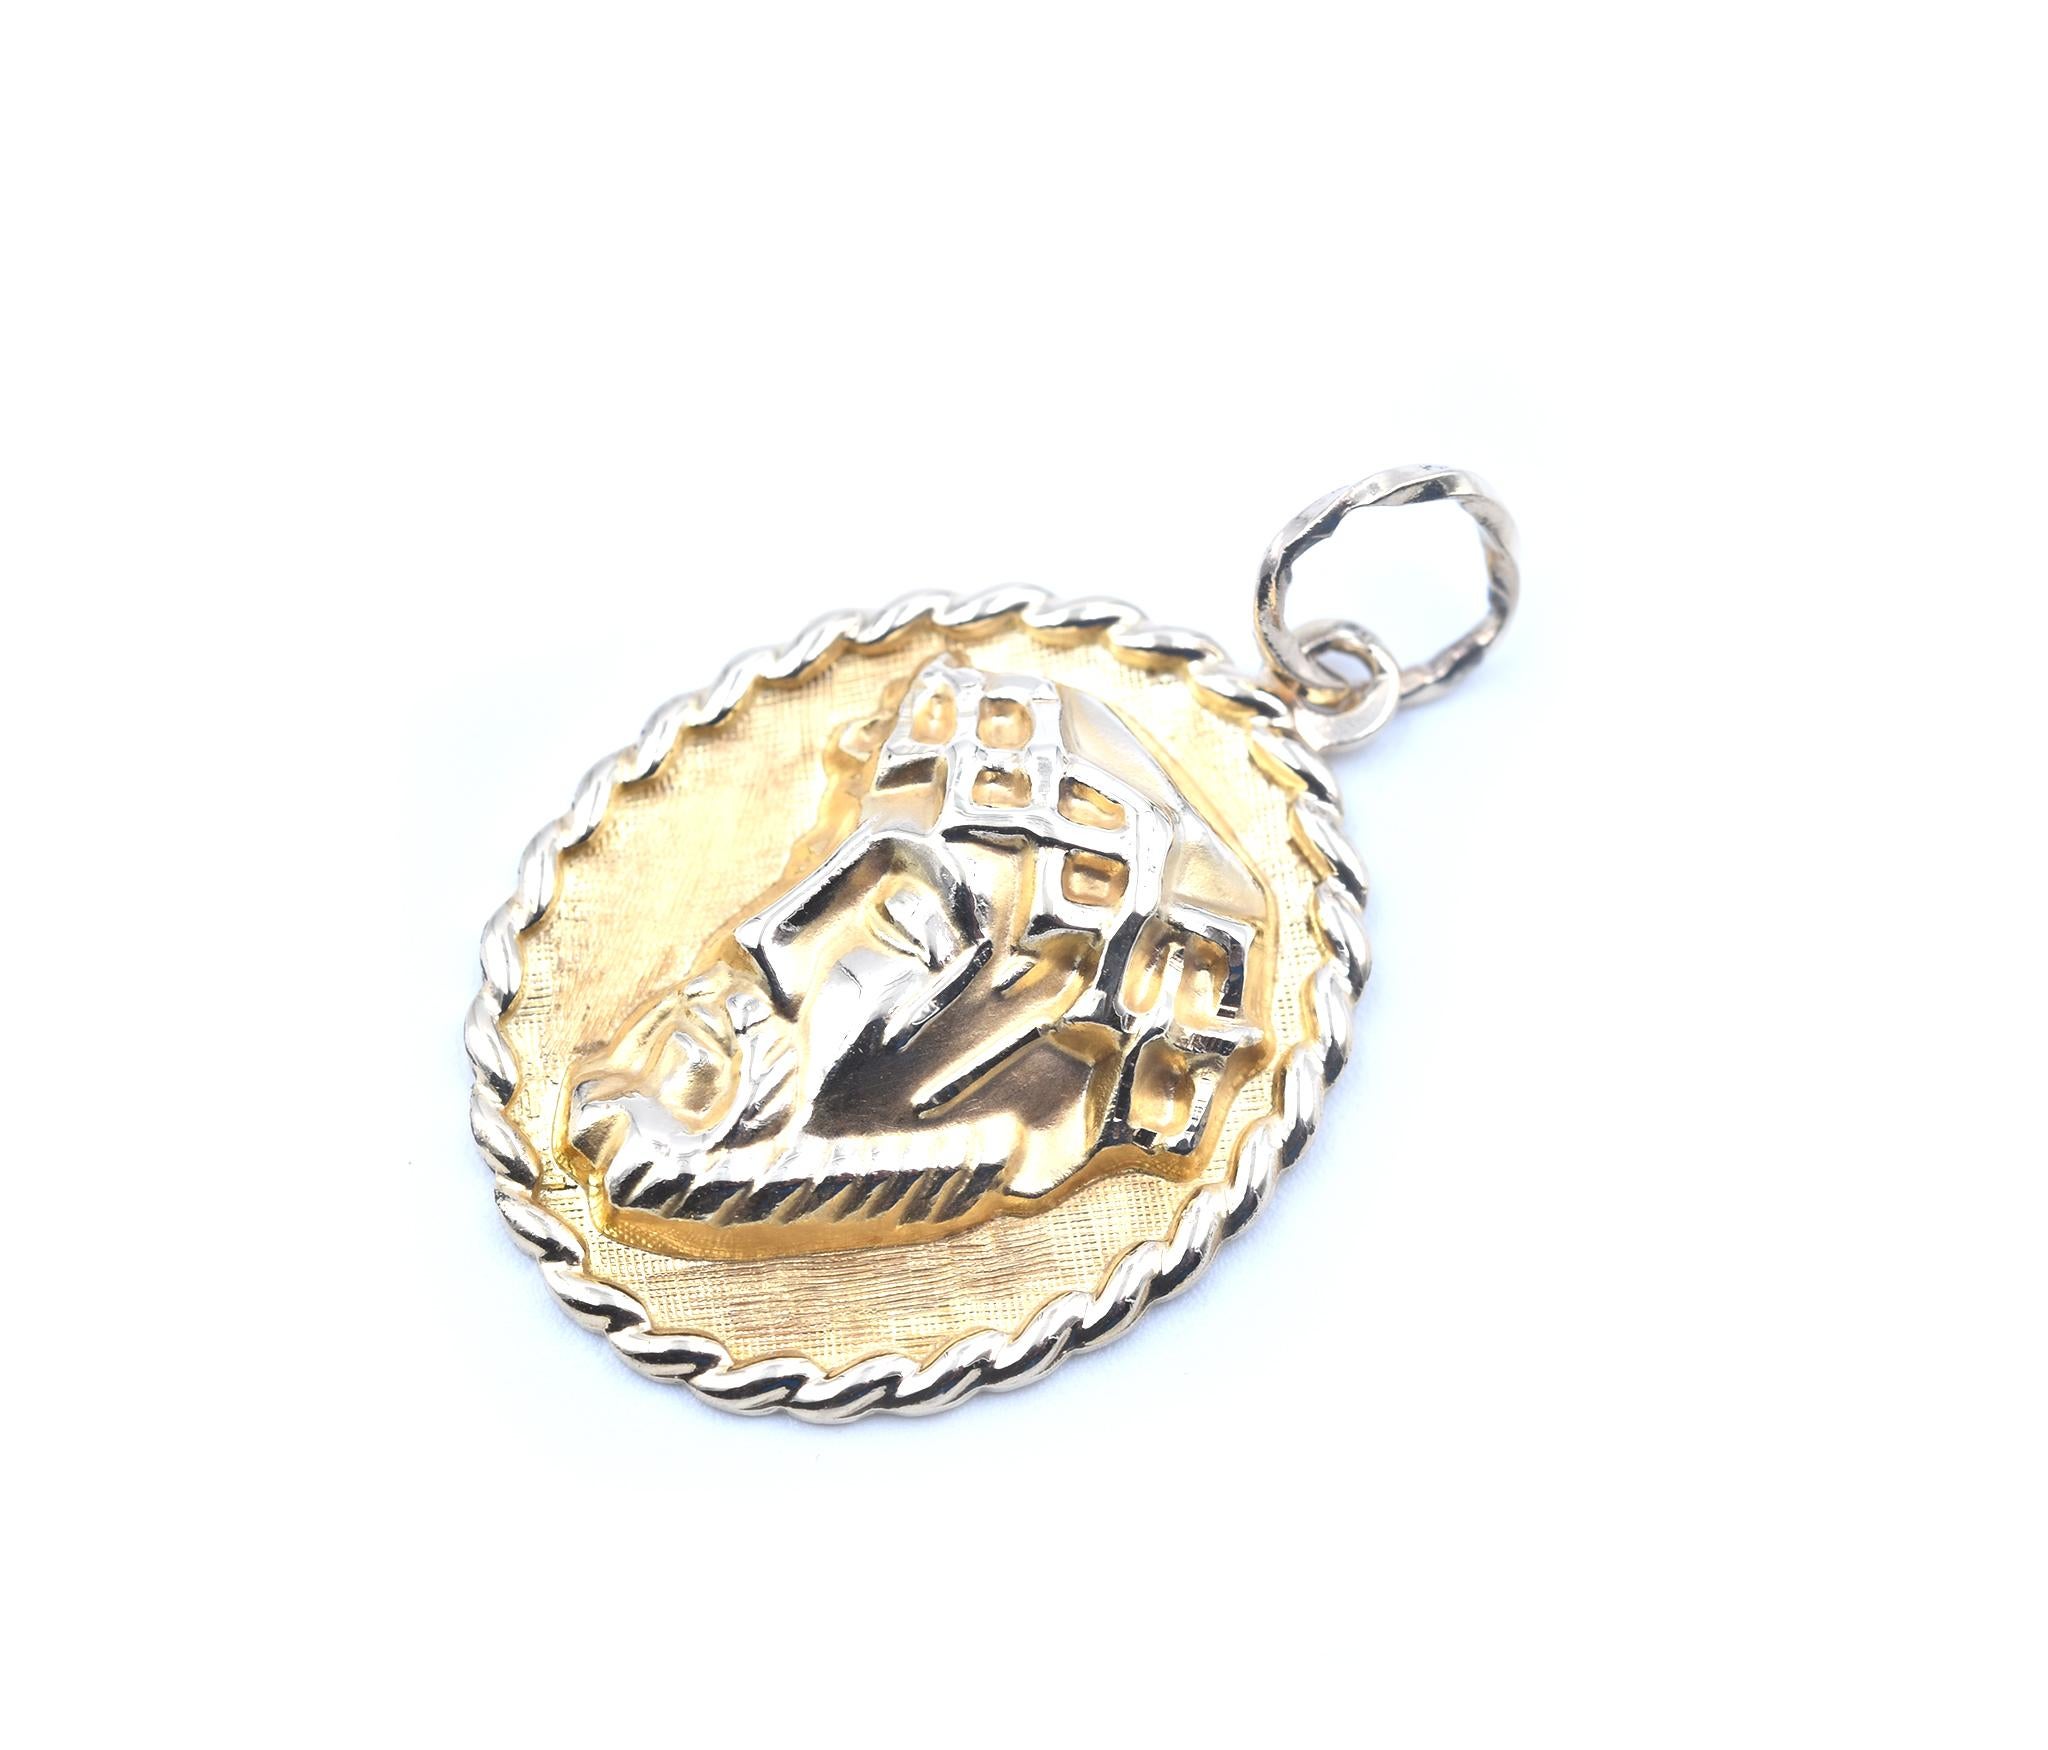 Designer: custom design
Material: 14k yellow gold
Dimensions: pendant measures 23.20mm x 28mm without the bail
Weight: 4.31 grams
